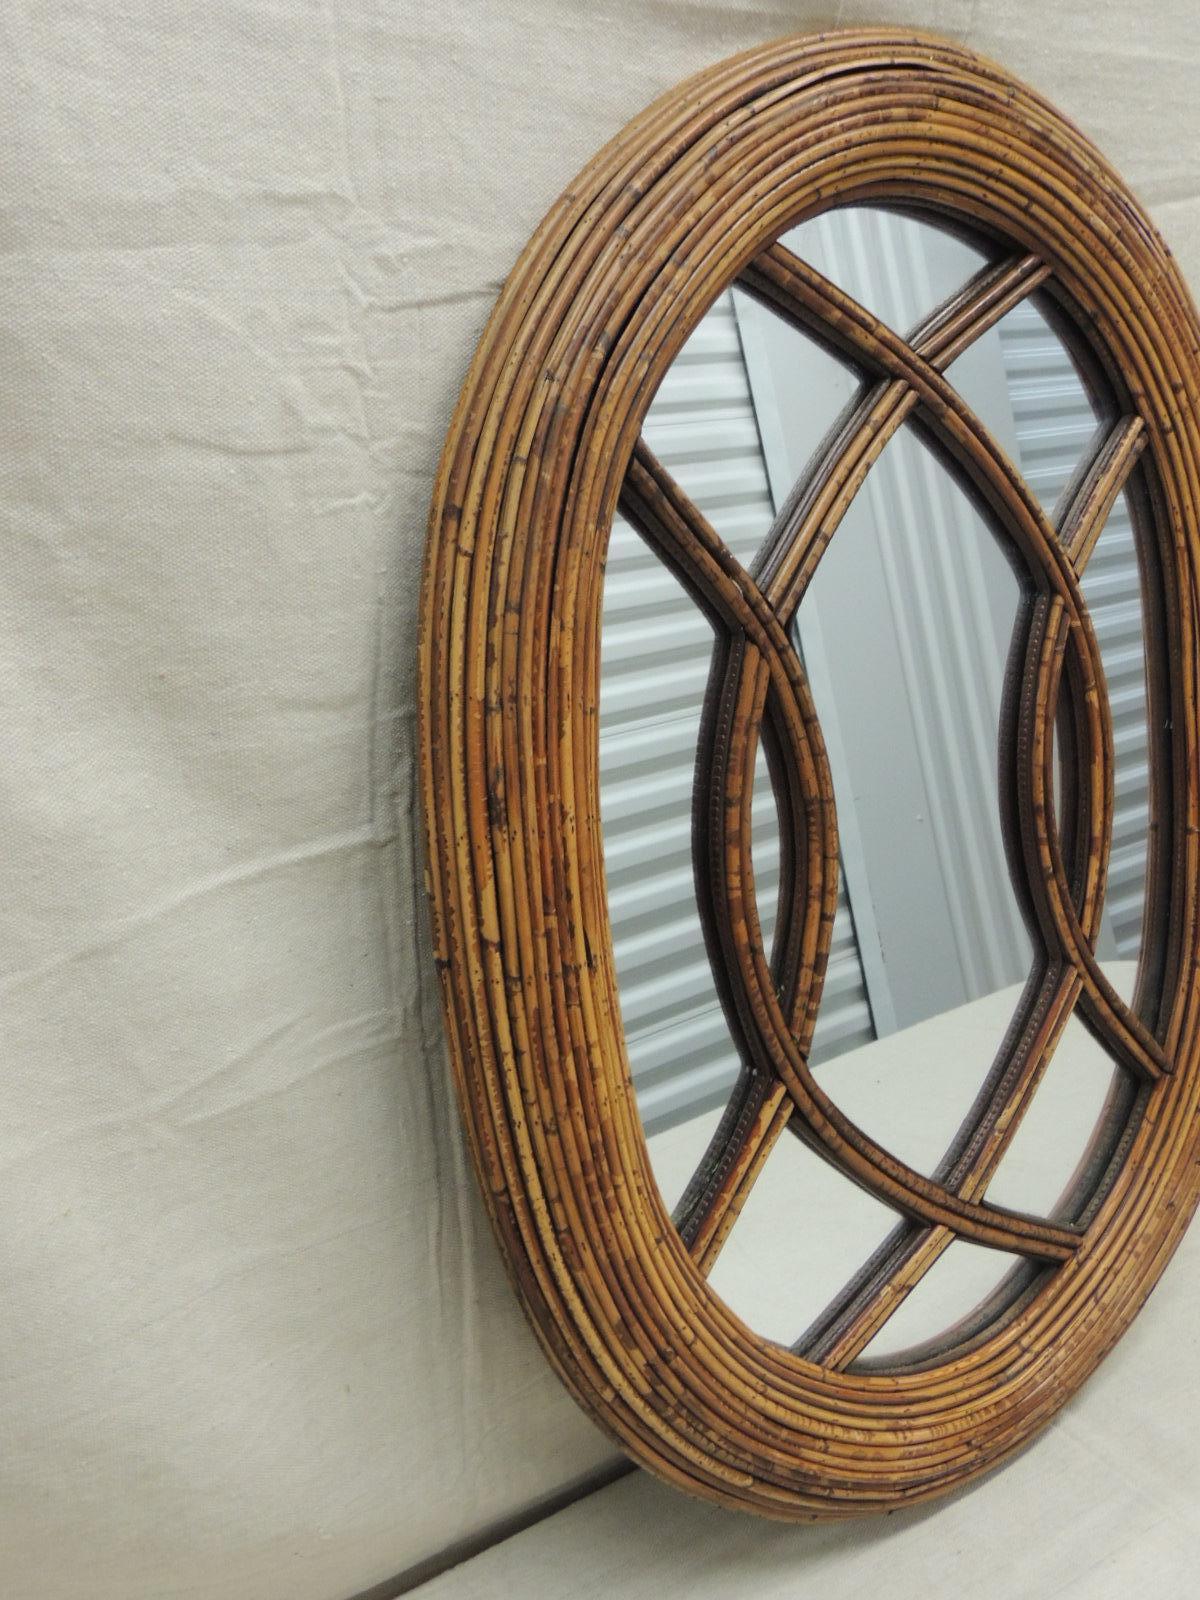 Vintage oval woven bamboo and rattan decorative wall mirror.
Size: 20